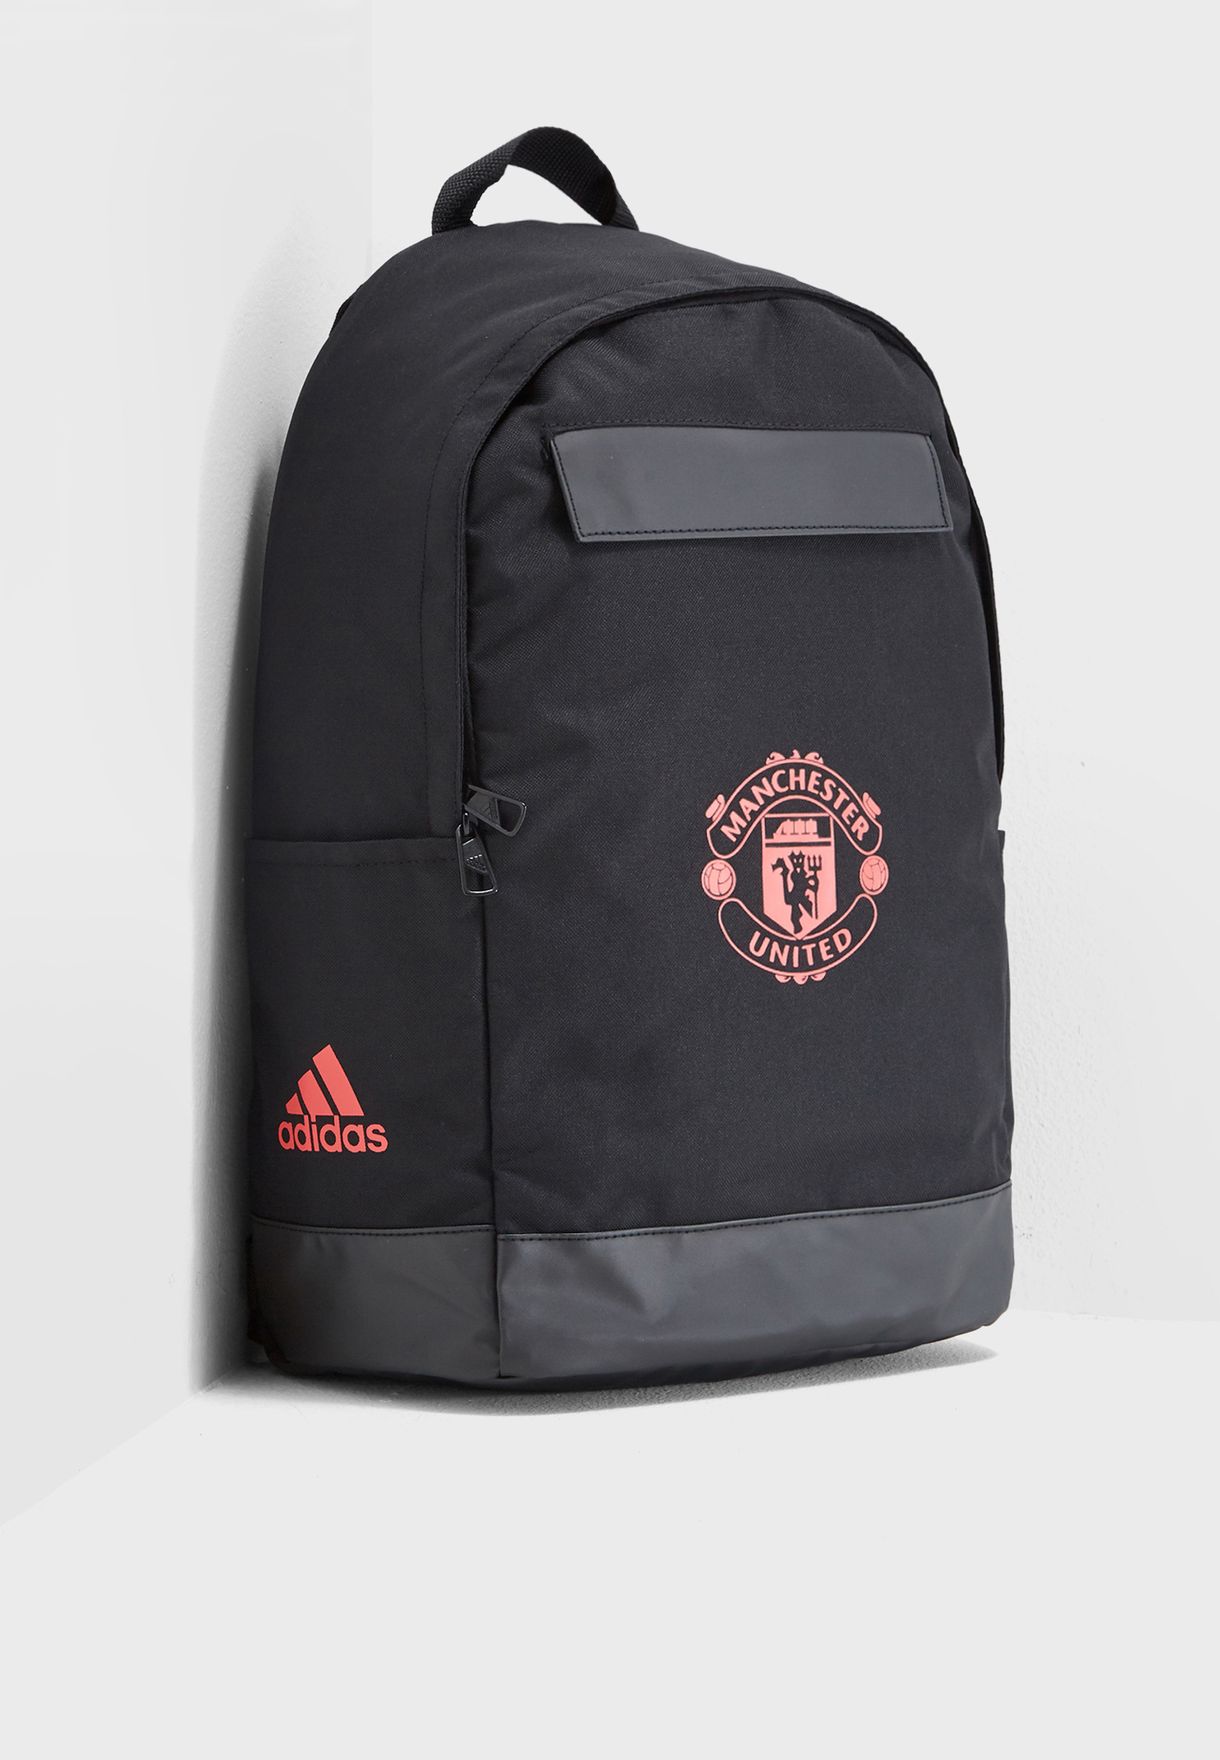 mufc backpack